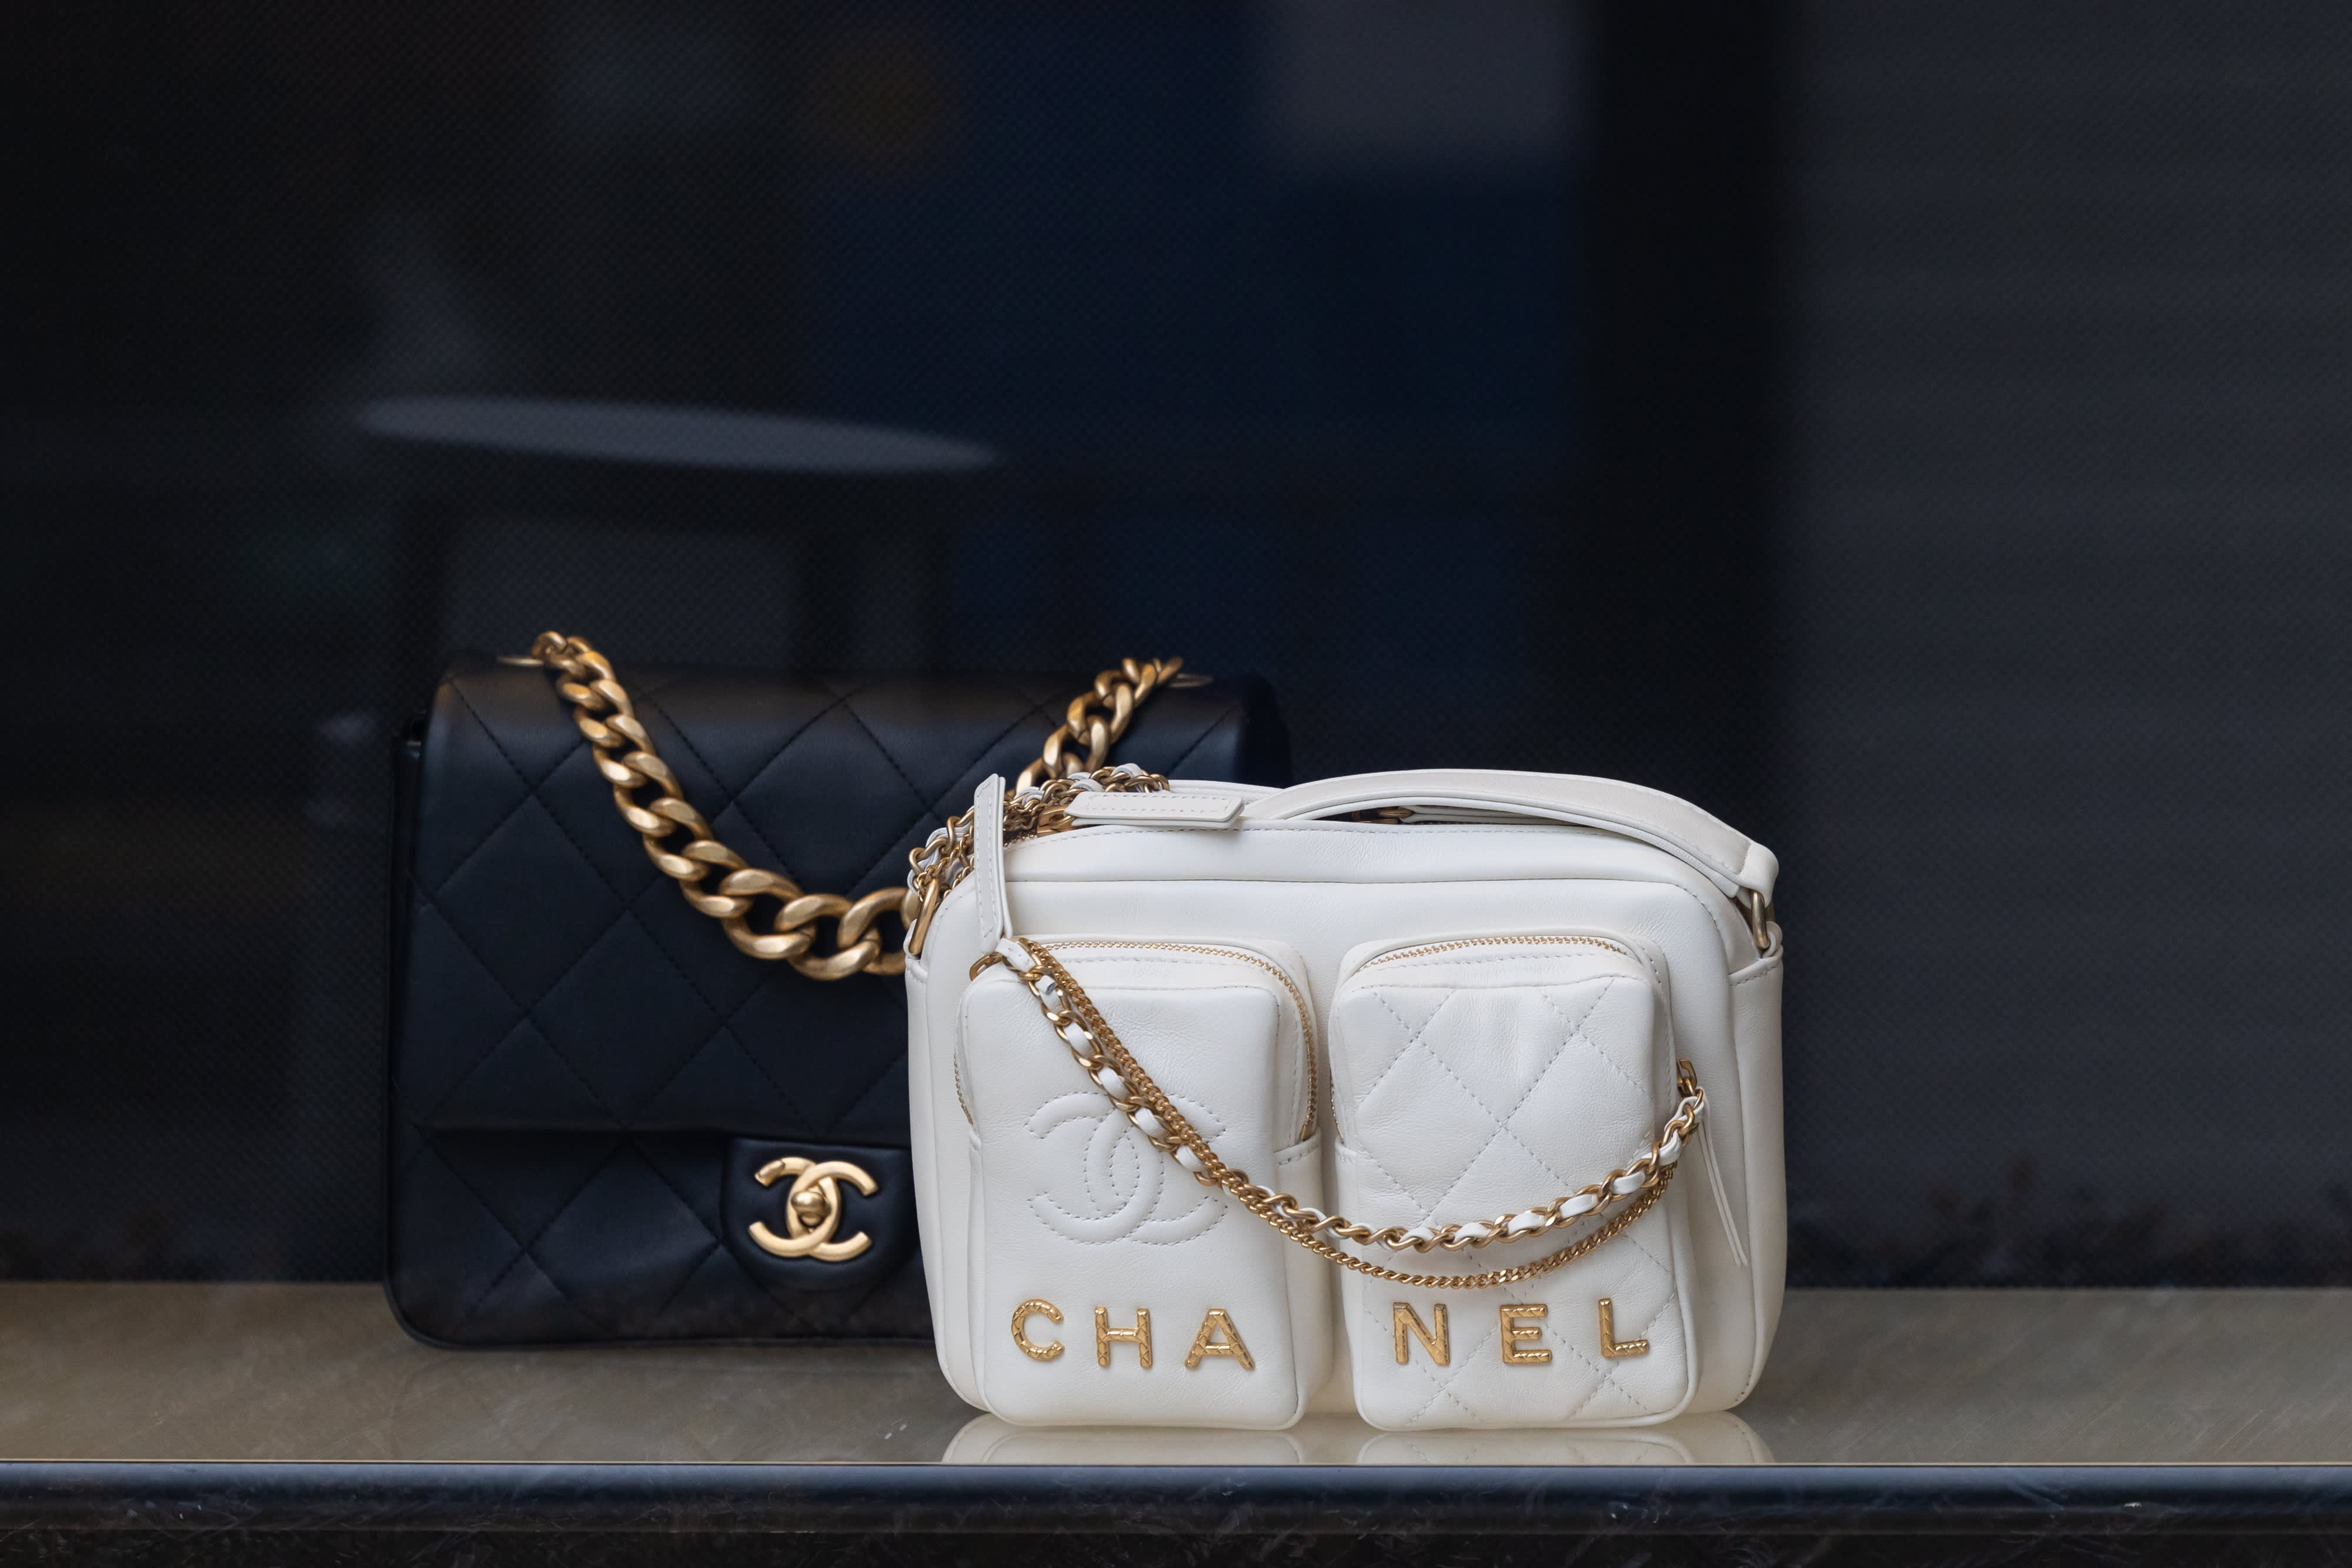 How to store, clean, care & protect luxury handbags inc Chanel